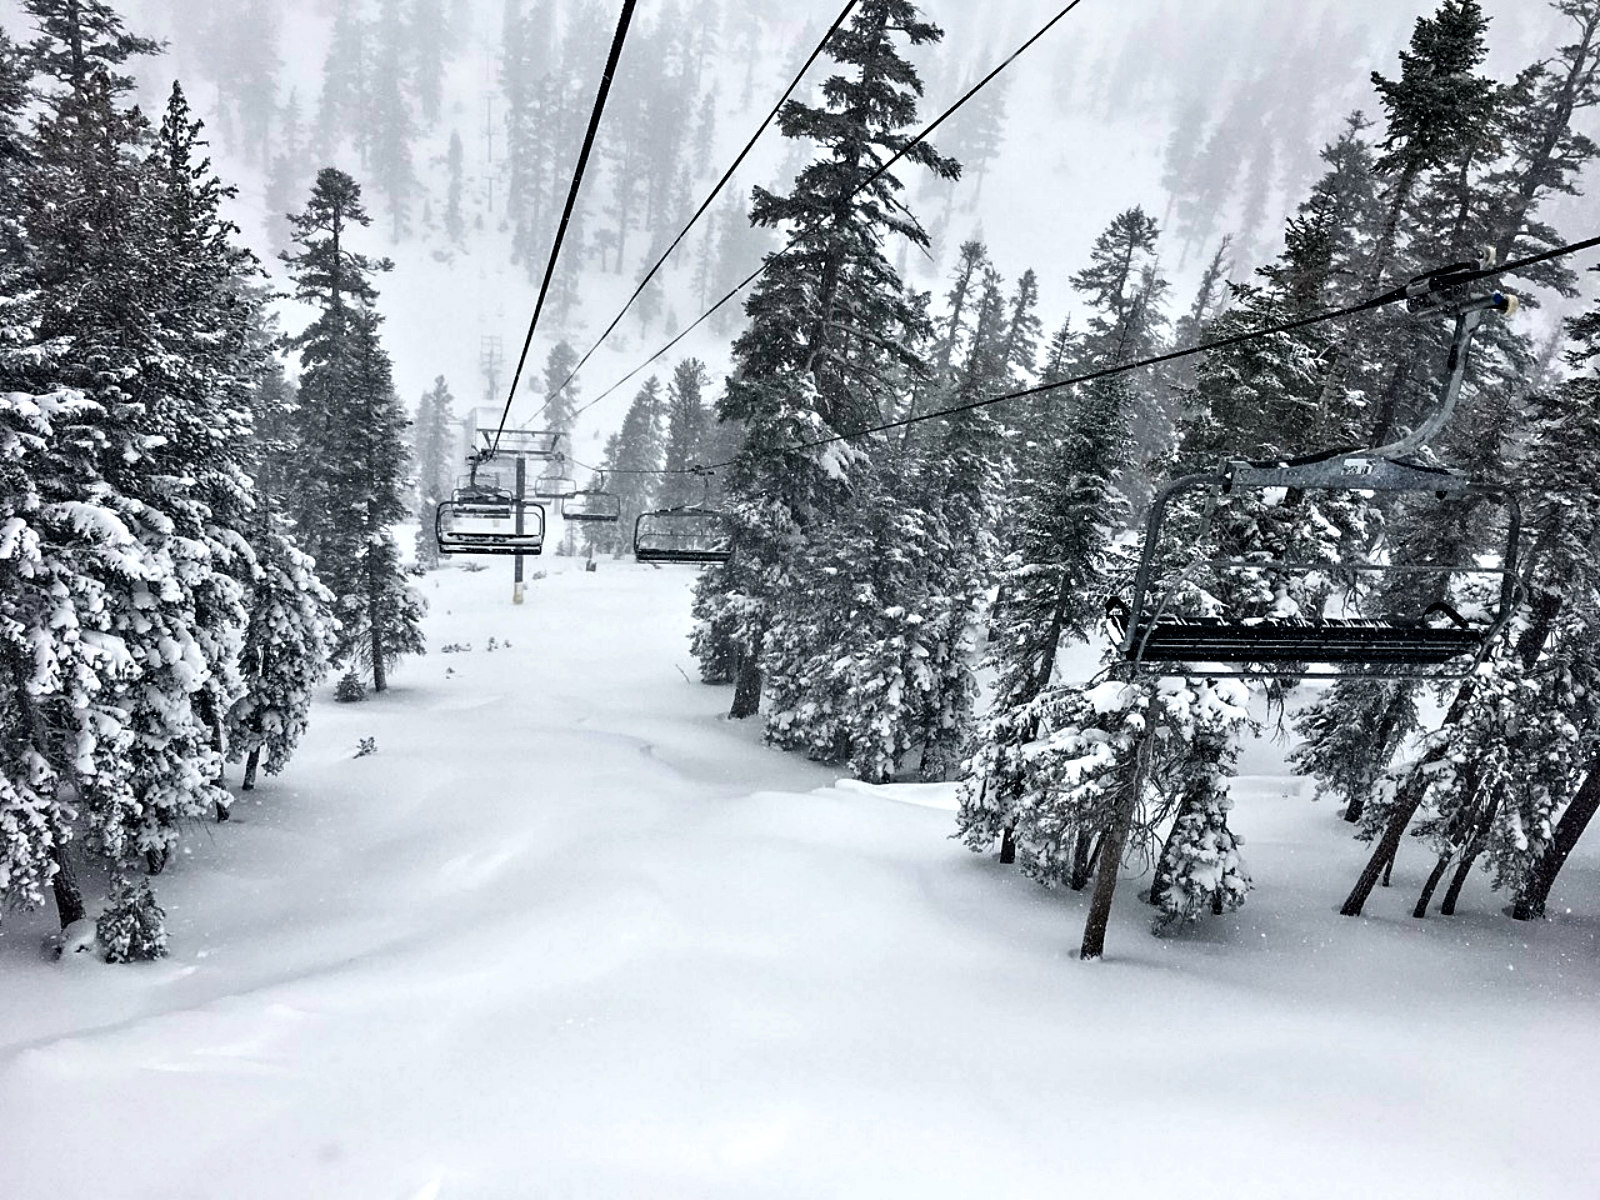 March already best month for snow at Lake Tahoe ski resorts